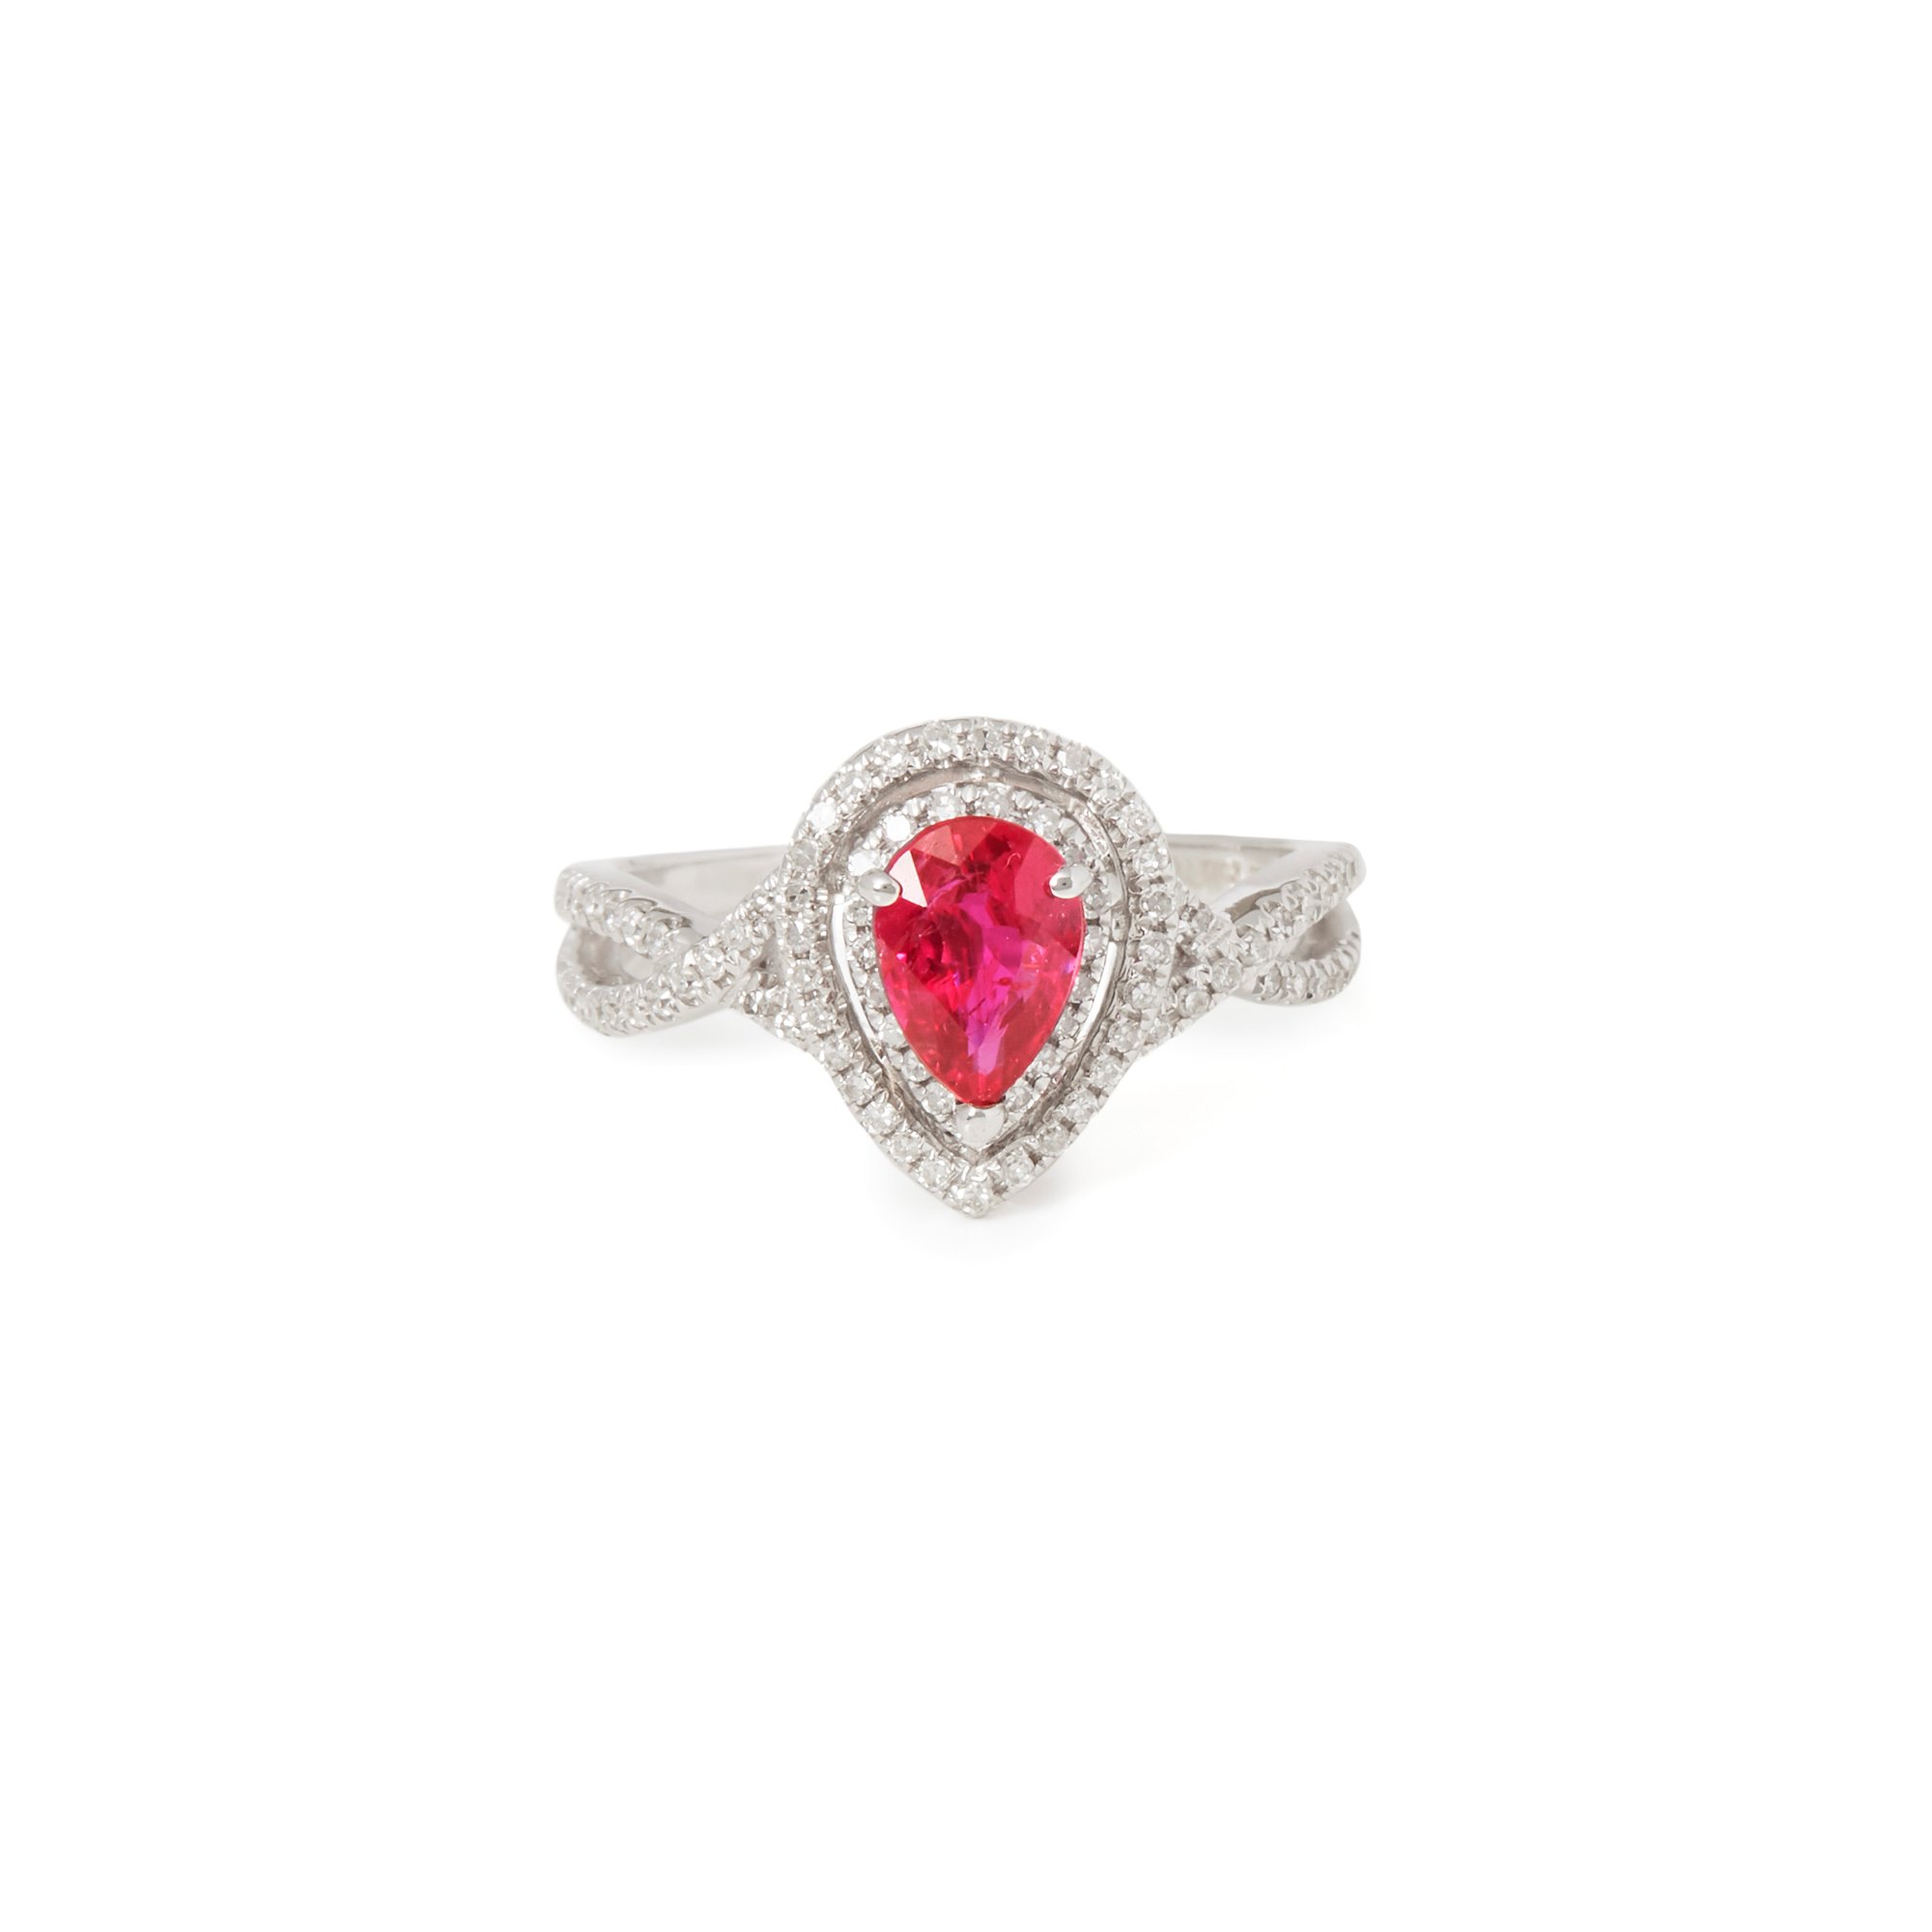 David Jerome Certified 1.02ct Untreated Burmese Pear Cut Ruby and Diamond 18ct gold Ring